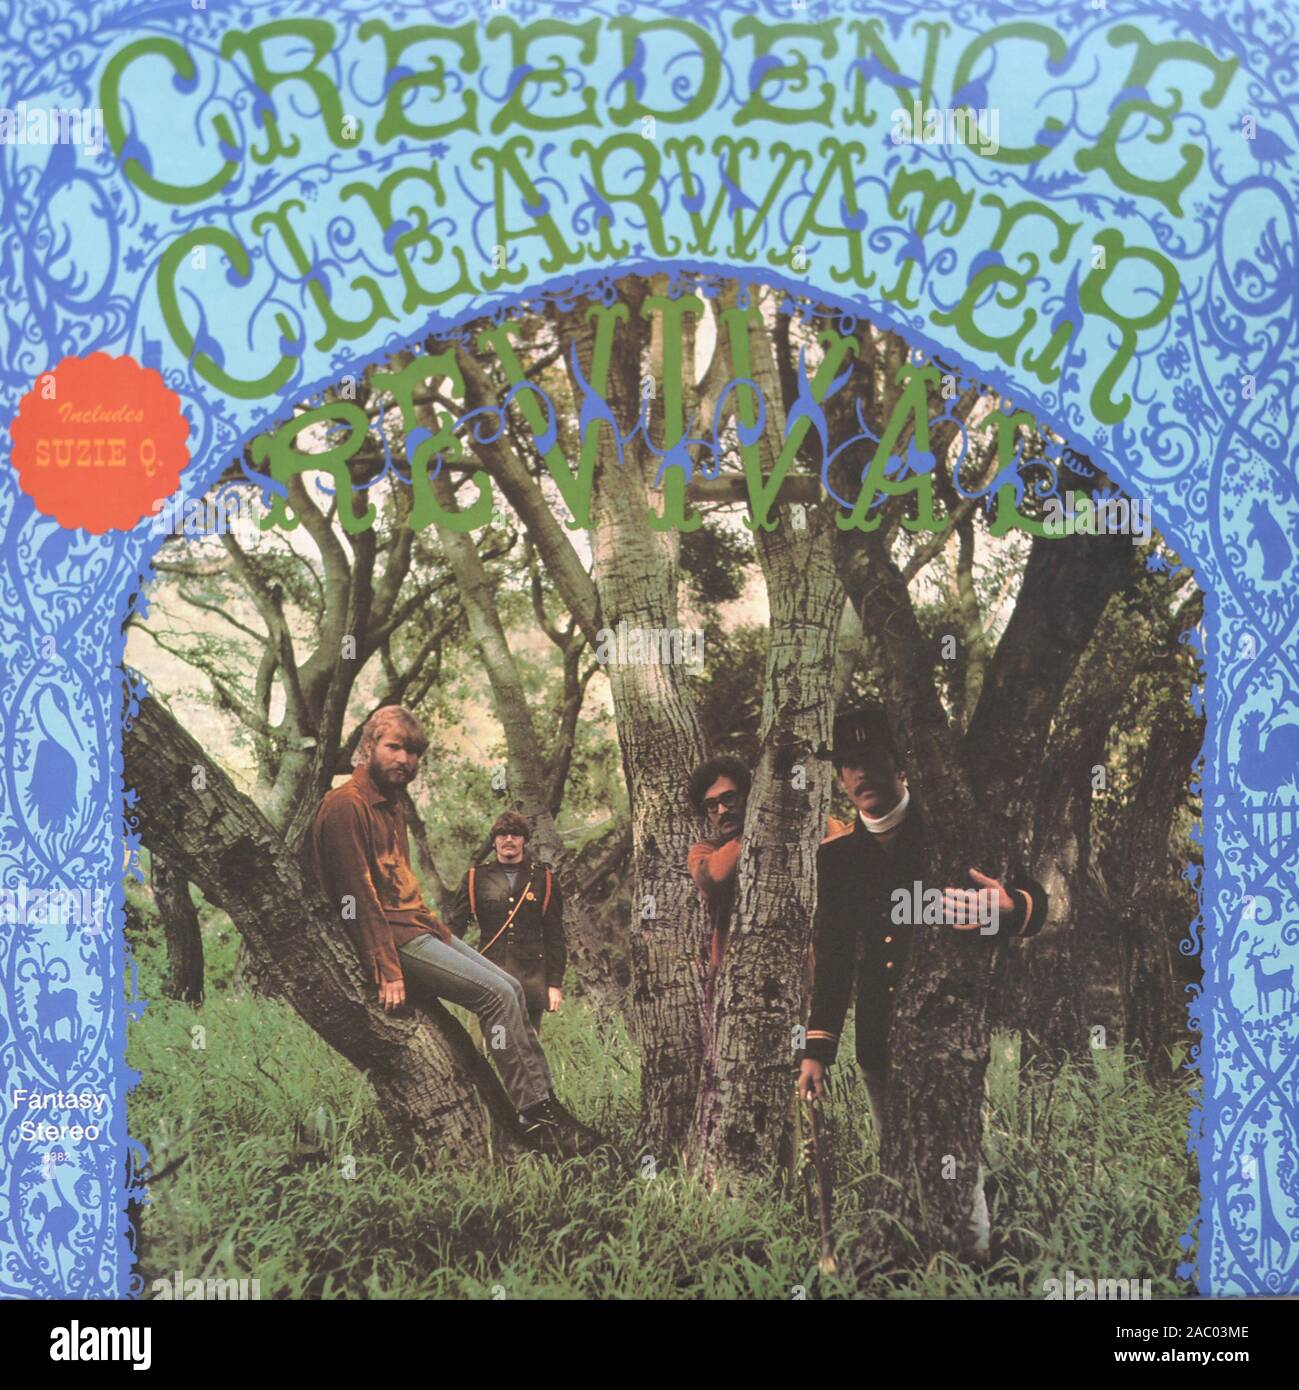 CCR Creedence Clearwater Revival - Vintage vinyl album cover Stock Photo -  Alamy